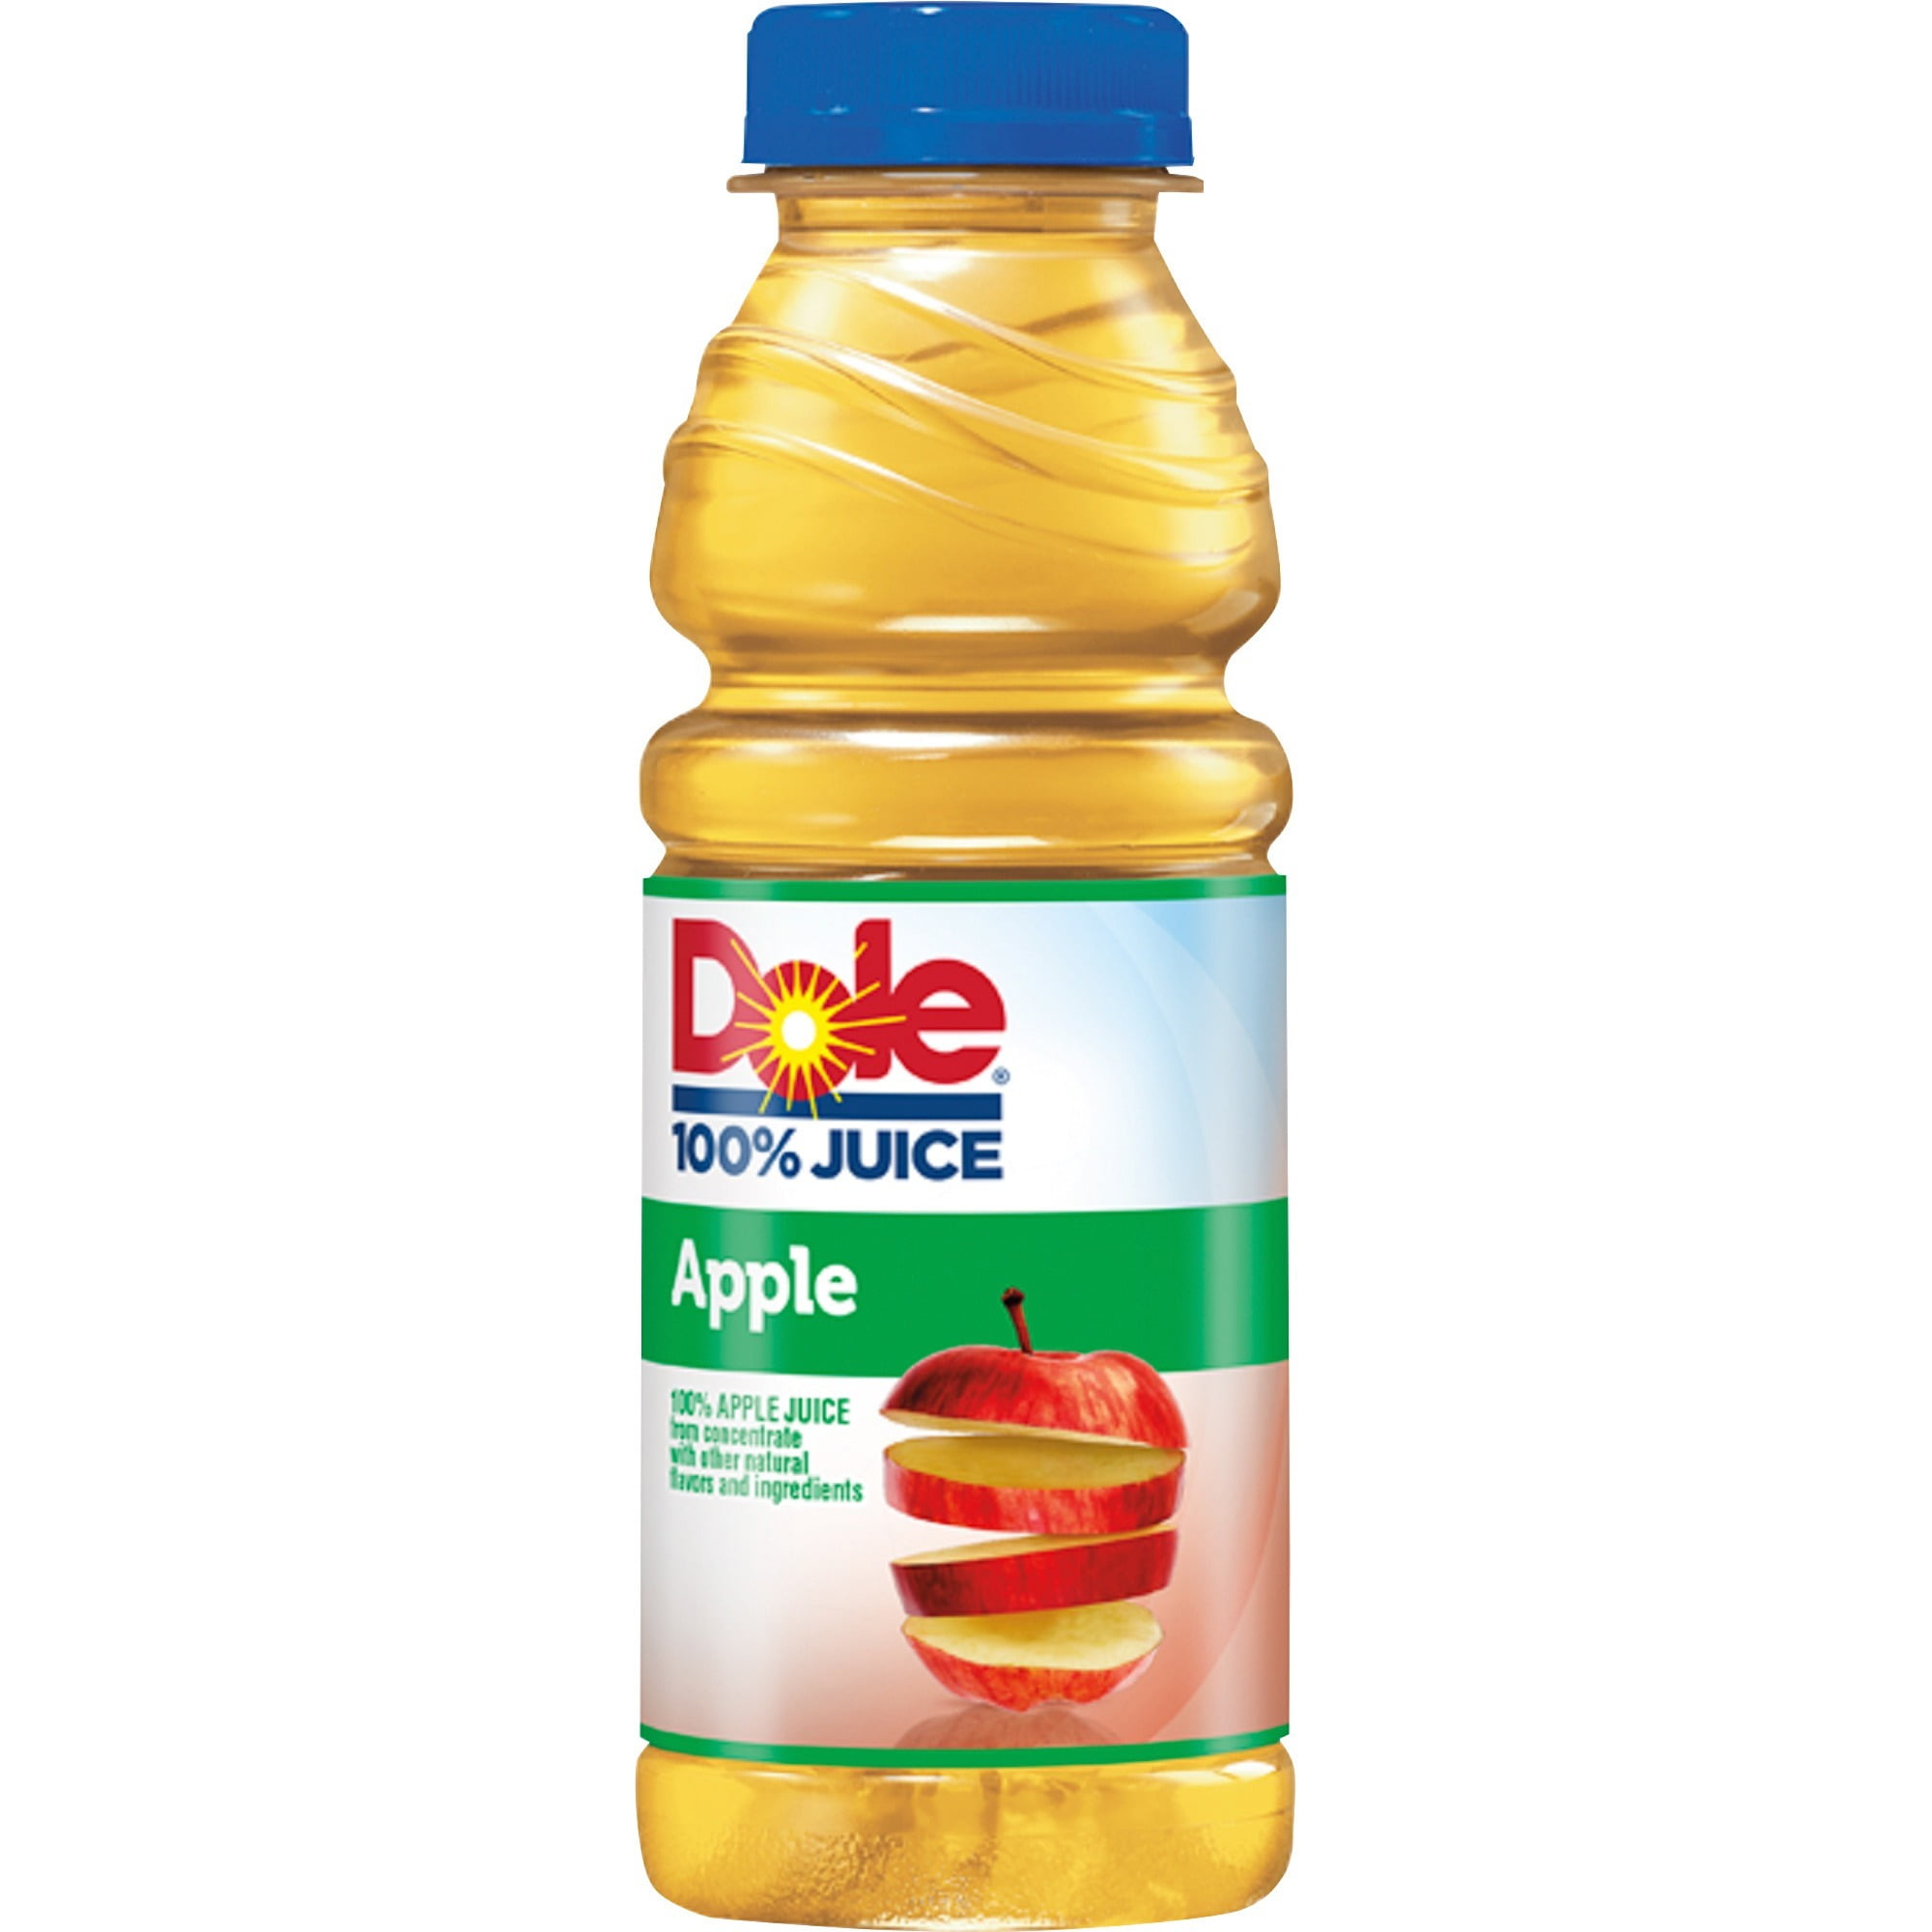 At Home How To Make Apple Juice In Brebes City